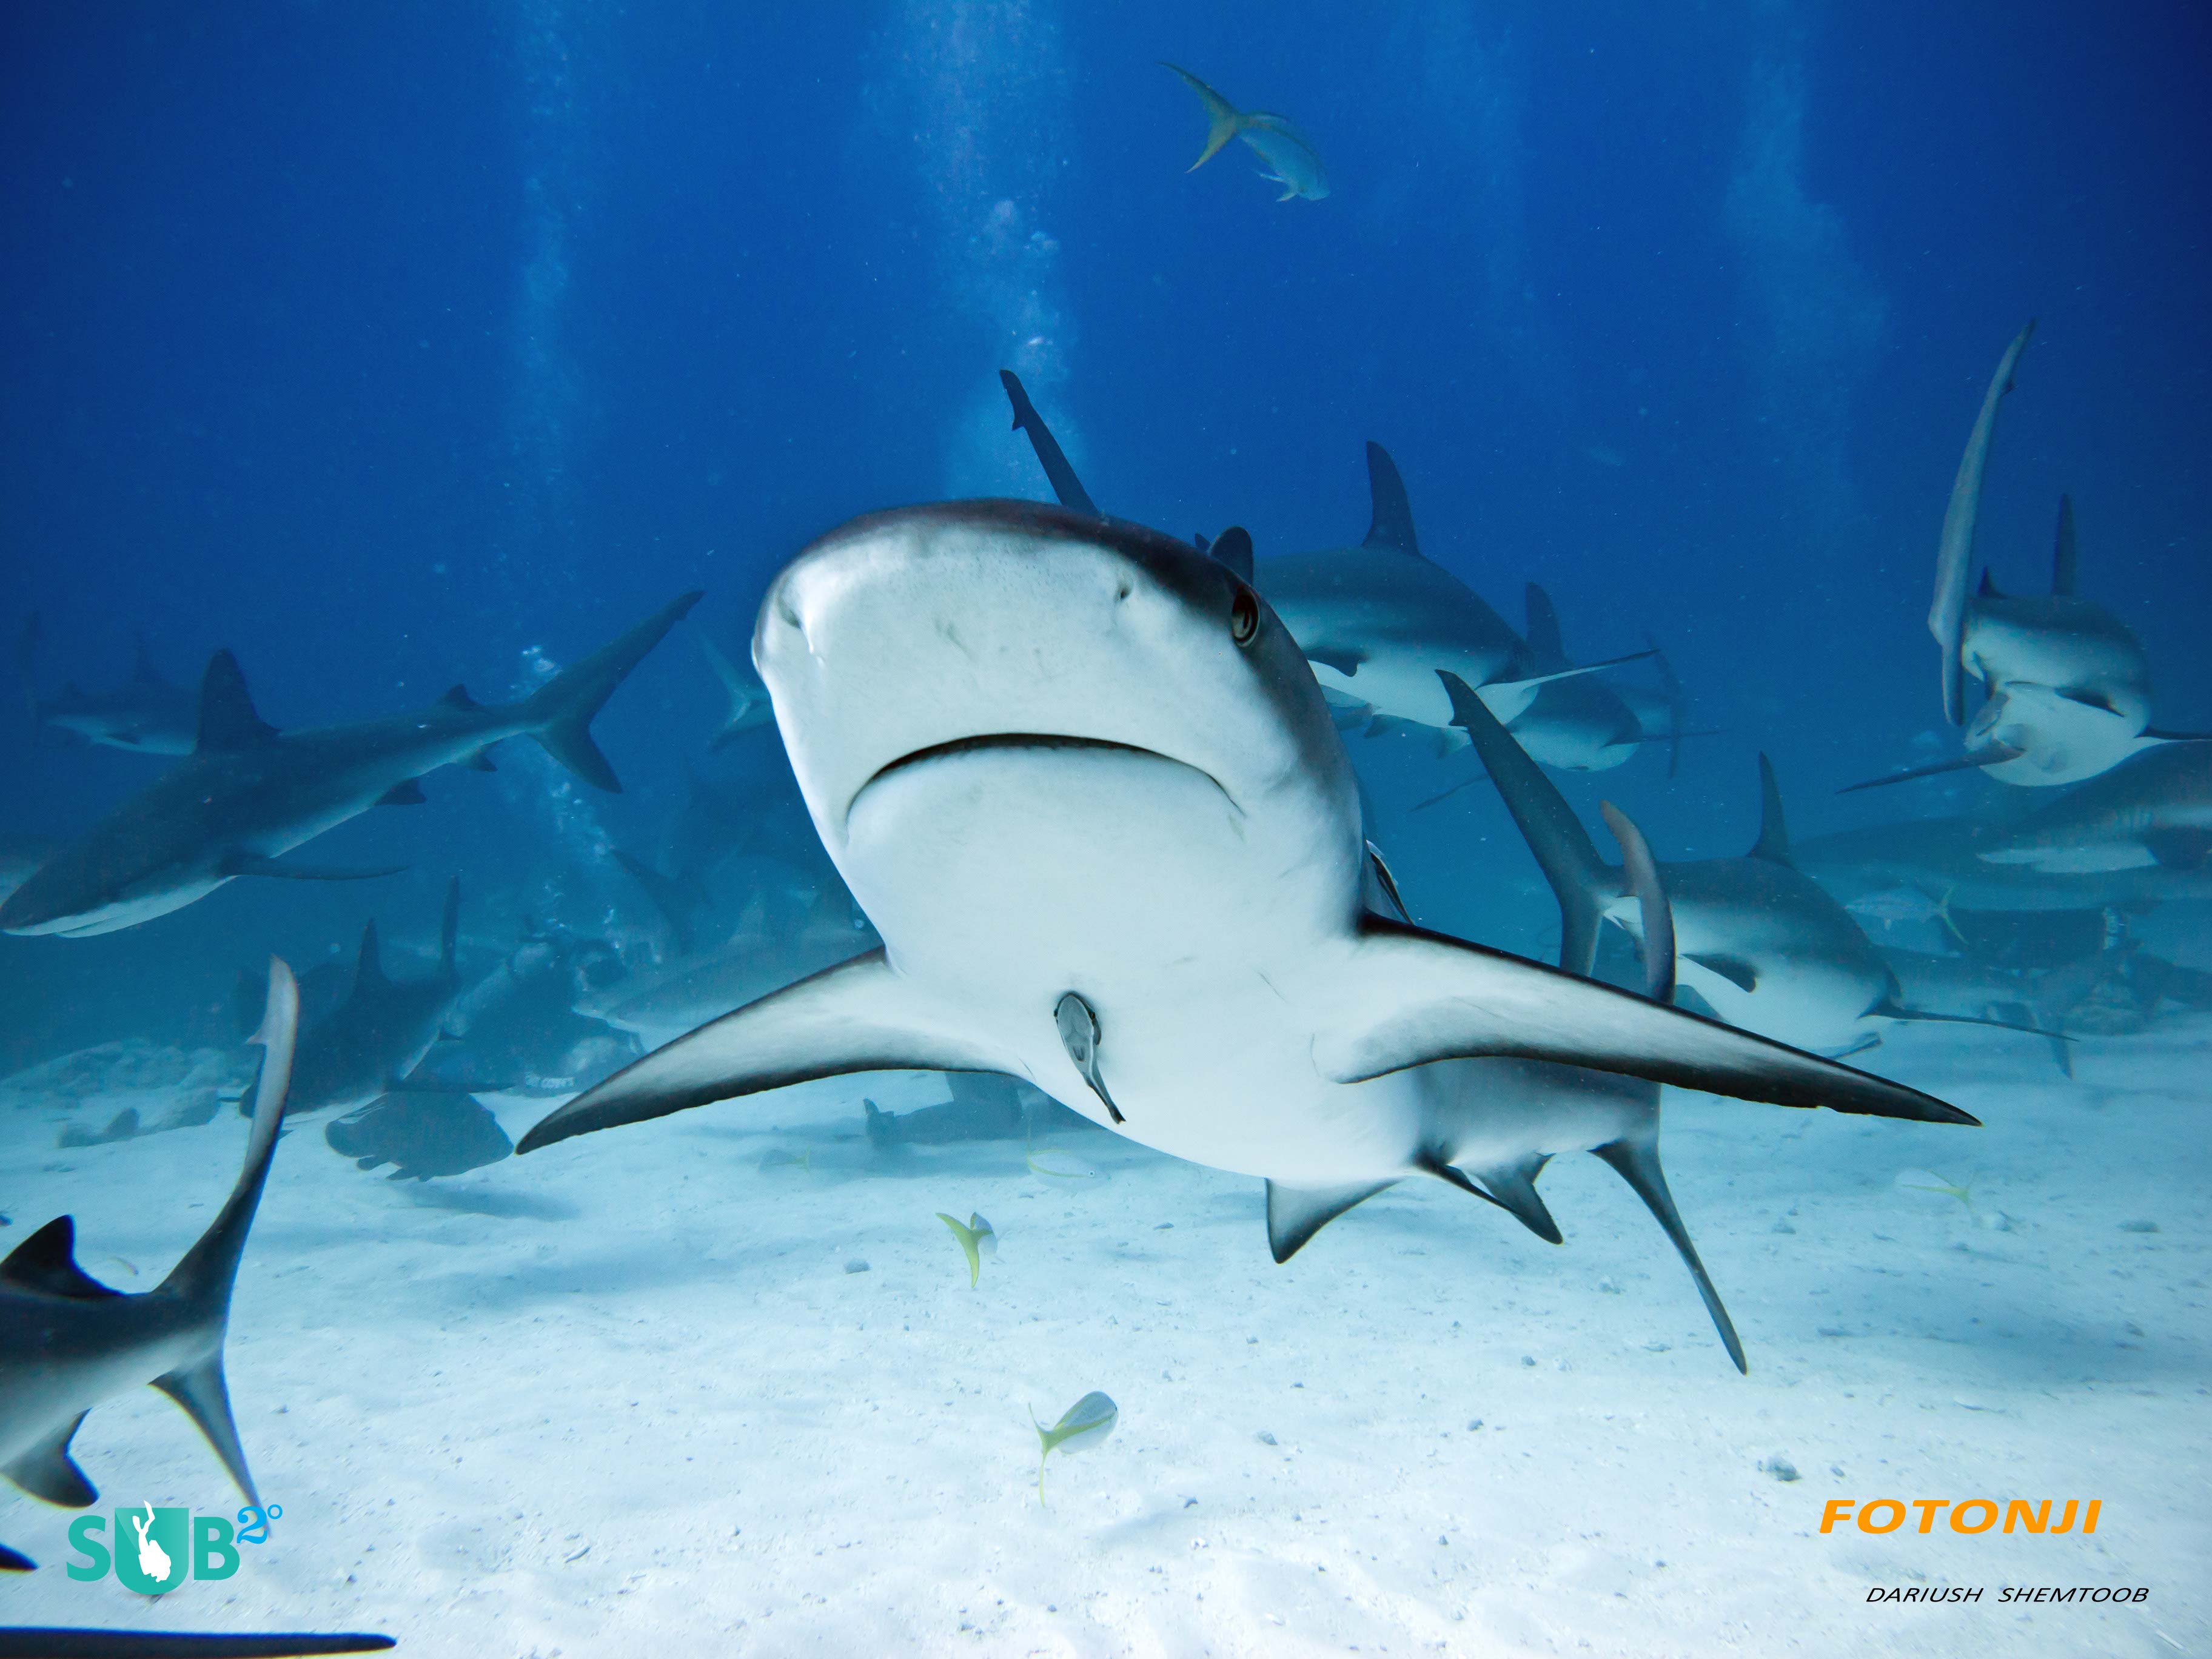 During the feeding frenzy, sharks pass overhead at great speeds.